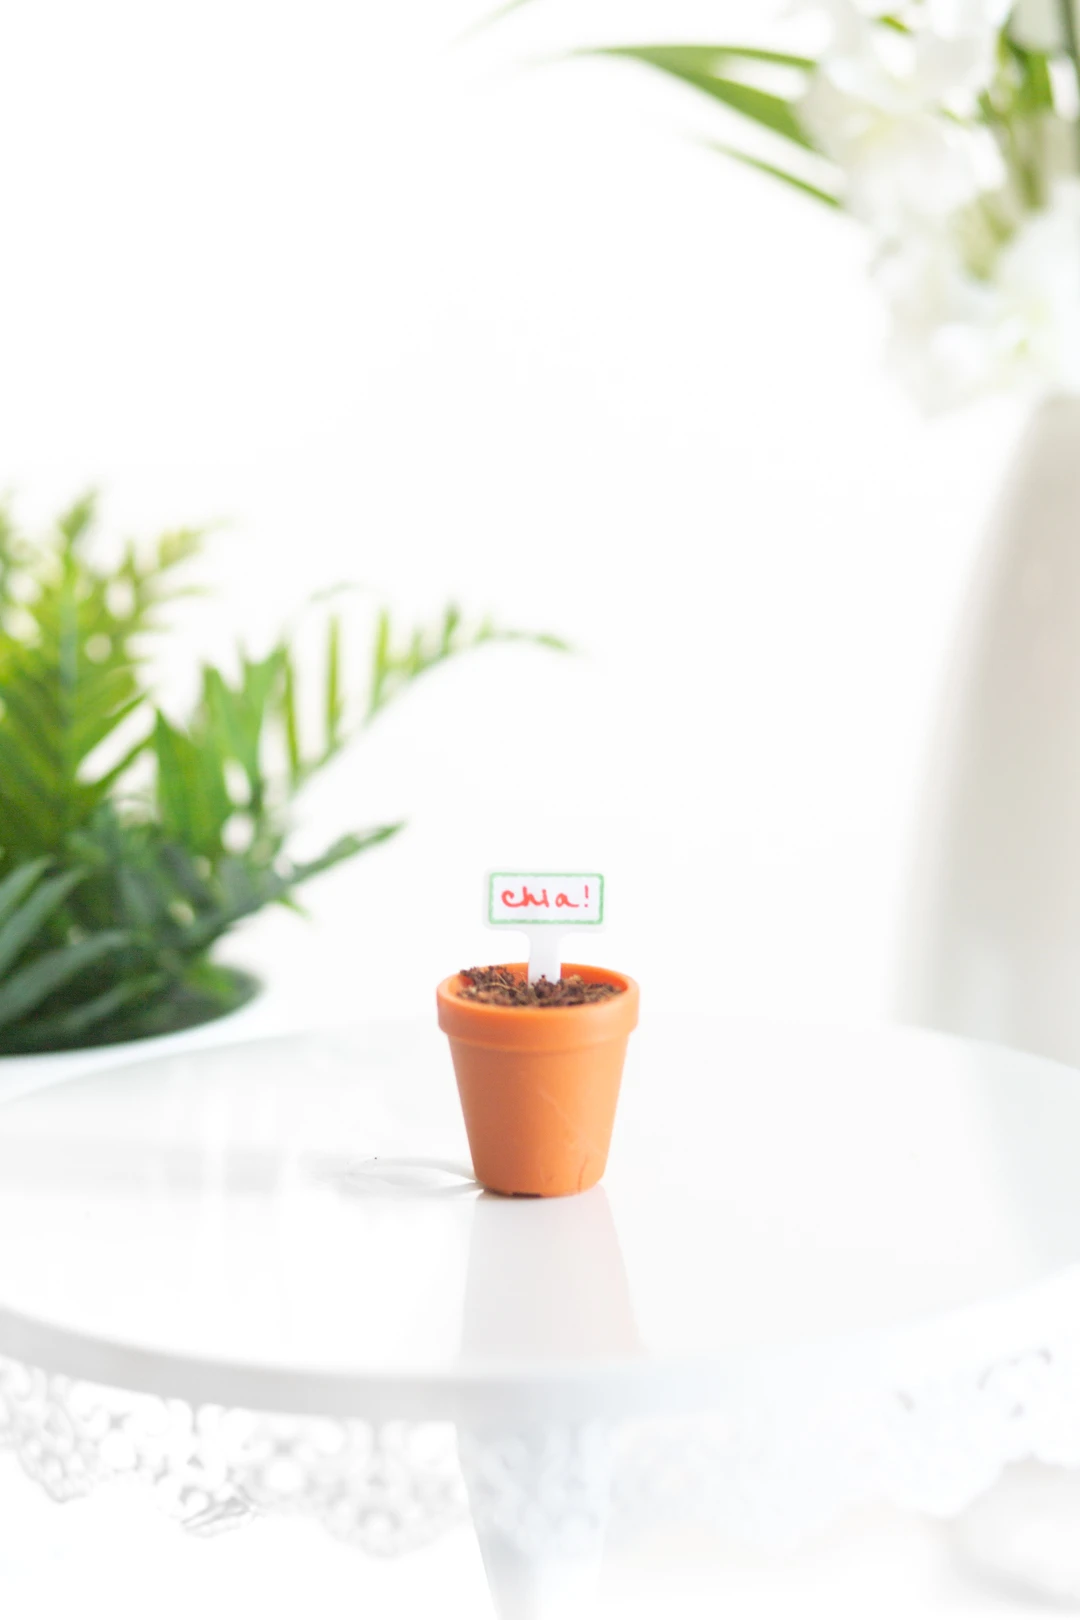 tiny growing pot with chia written on sign